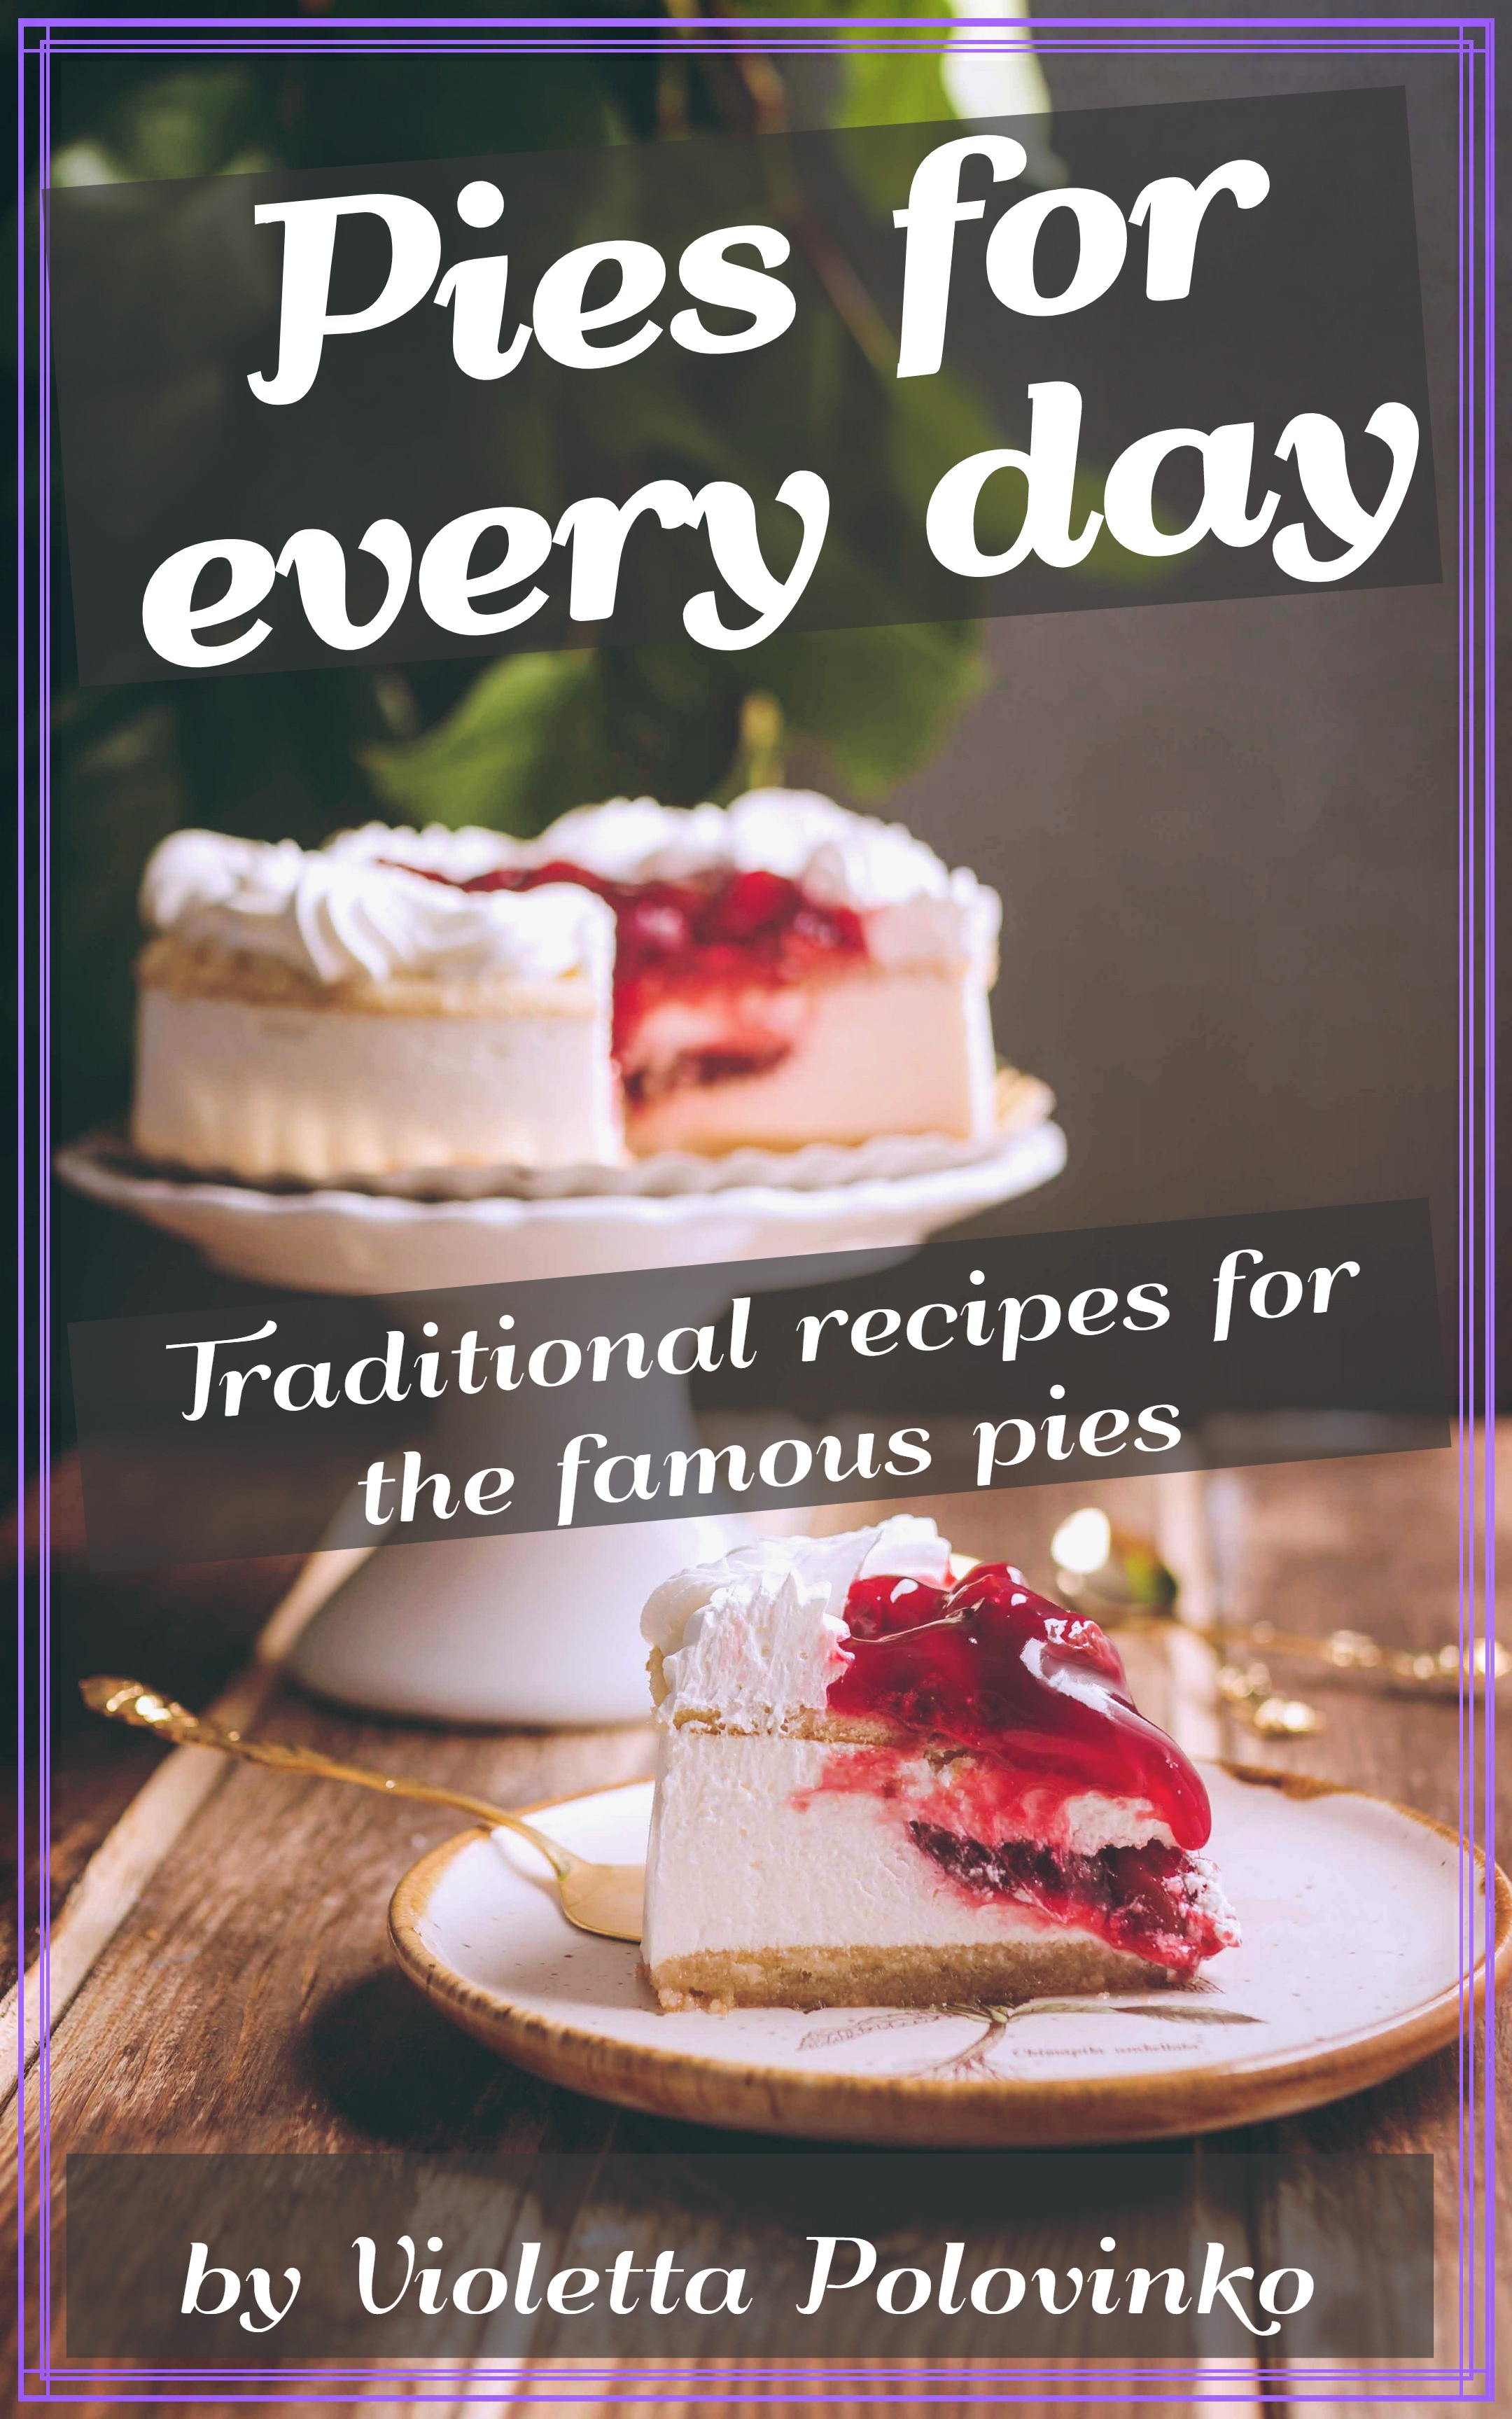 FREE: Pies for every day: Traditional recipes for the famous pies by Violetta Polovinko